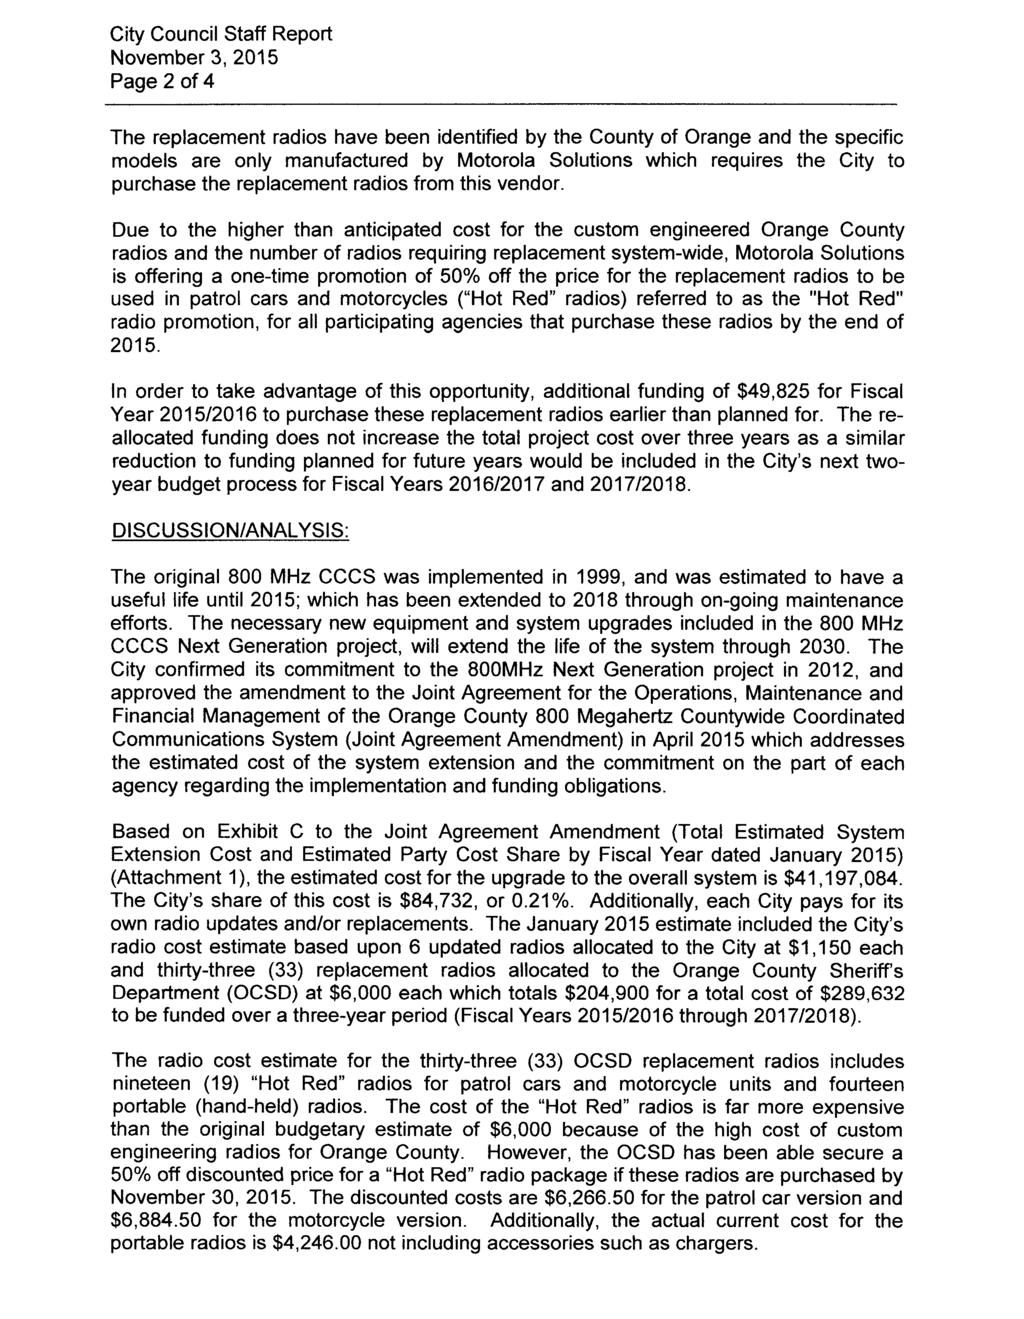 City Council Staff Report November 3, 2015 Page 2 of 4 The replacement radios have been identified by the County of Orange and the specific models are only manufactured by Motorola Solutions which